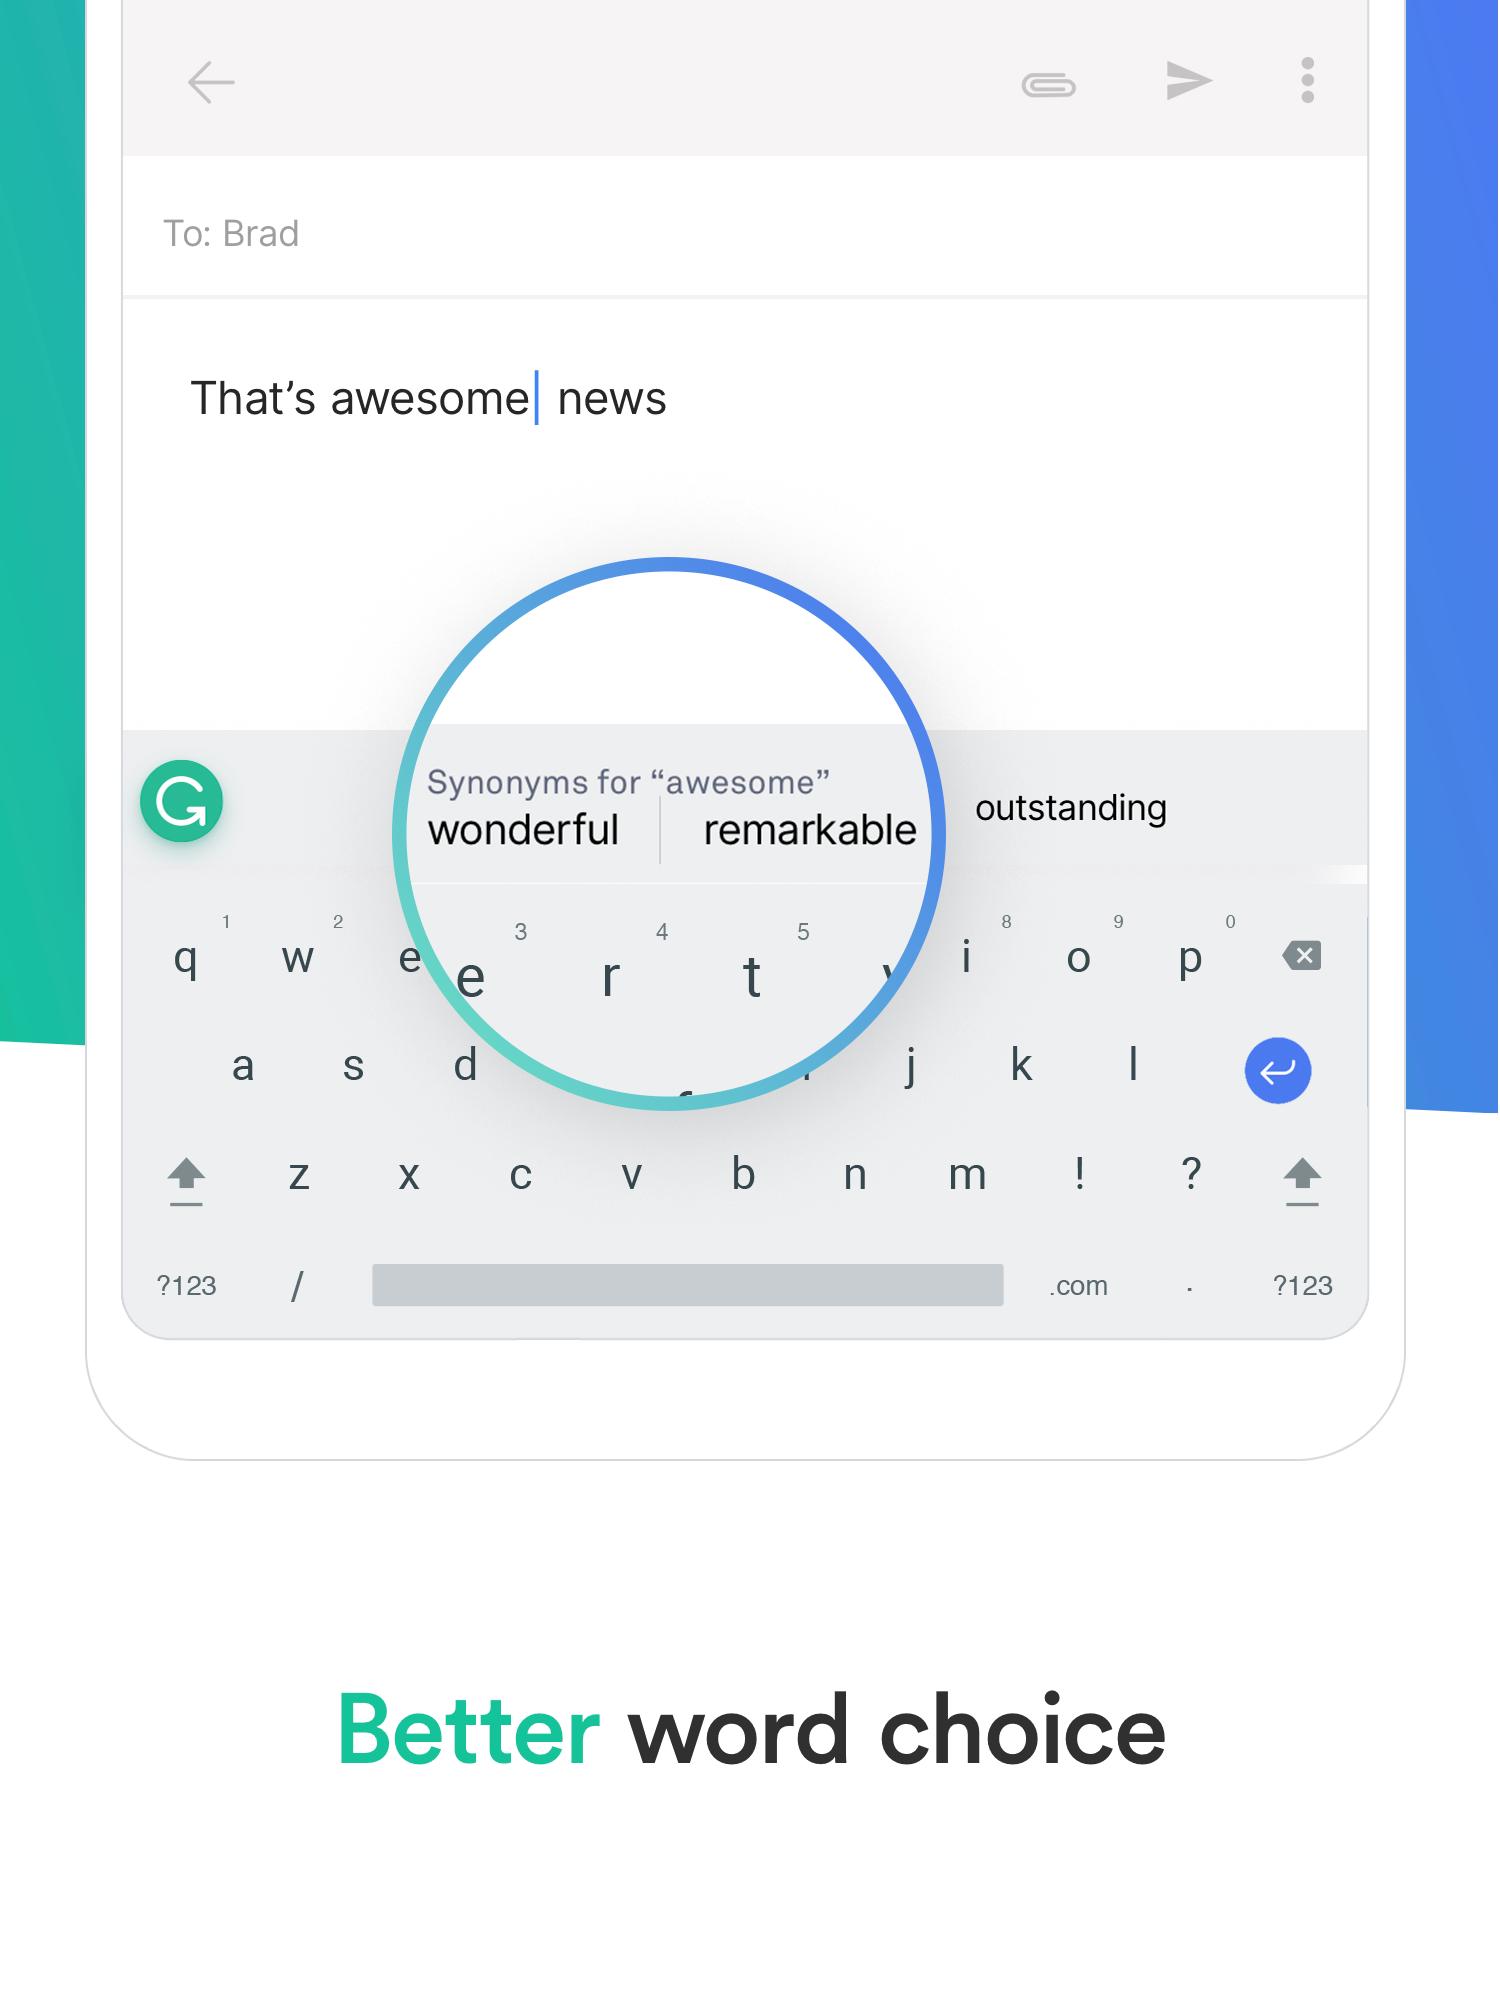 Grammarly Keyboard — Type with confidence 1.4.0.7 Screenshot 16